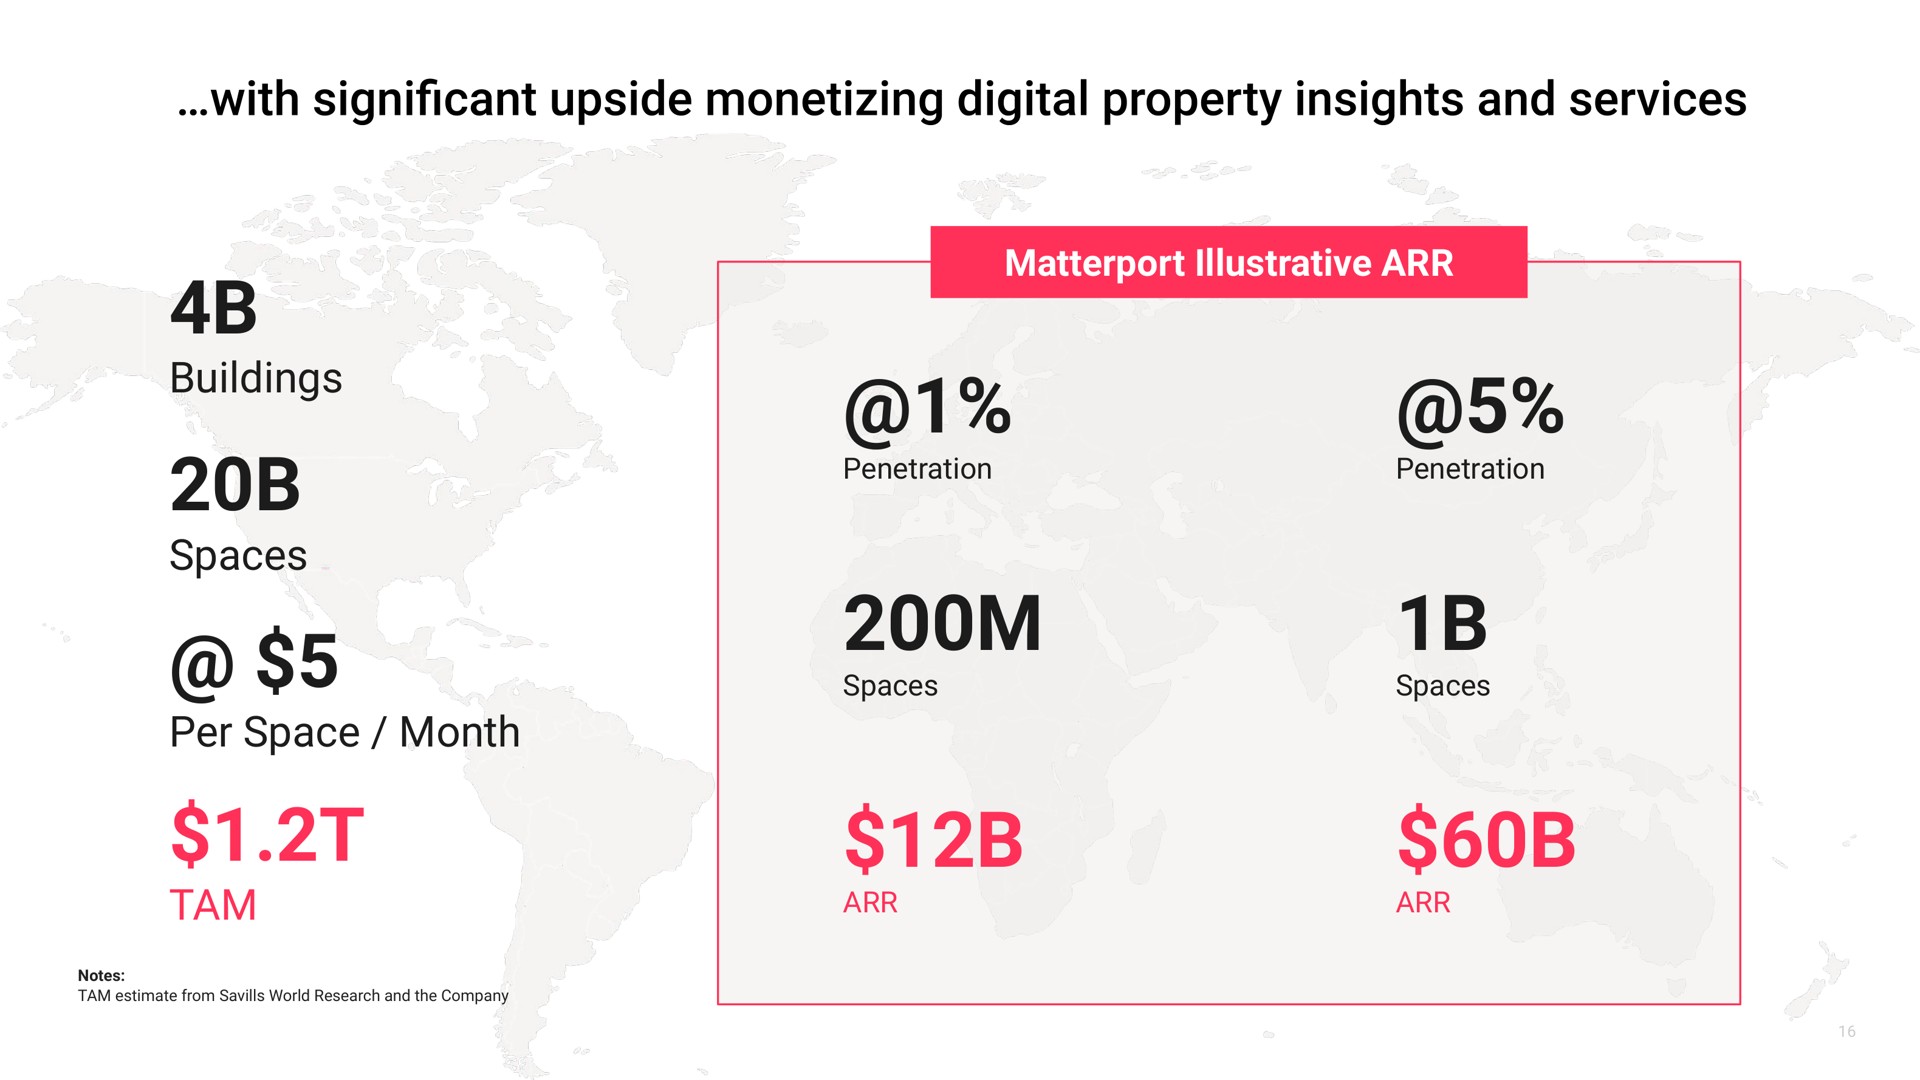 buildings spaces per space month tam illustrative with significant upside monetizing digital property insights and services | Matterport